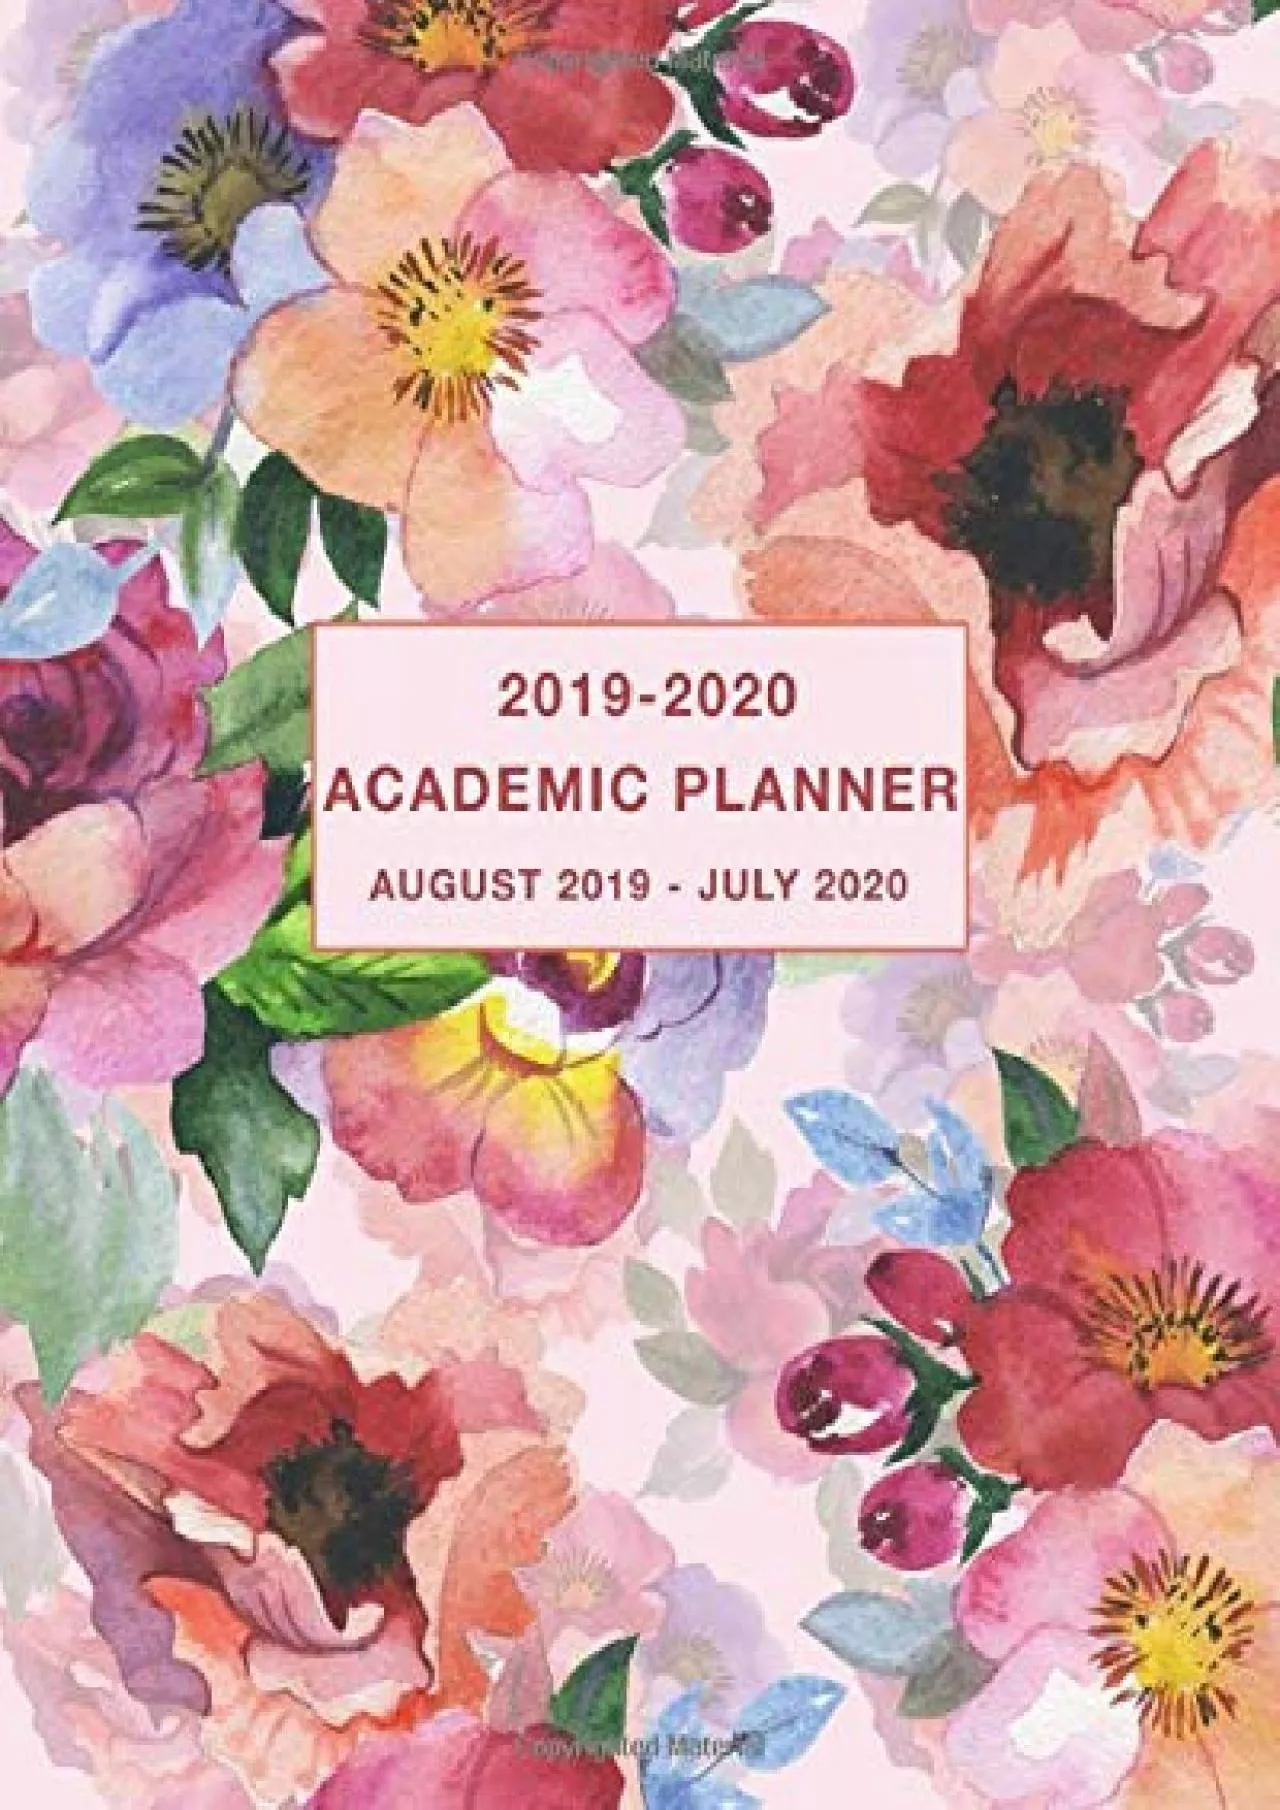 [DOWNLOAD] Academic Planner 2019-2020 August 2019 - July 2020: Weekly and Monthly Planner